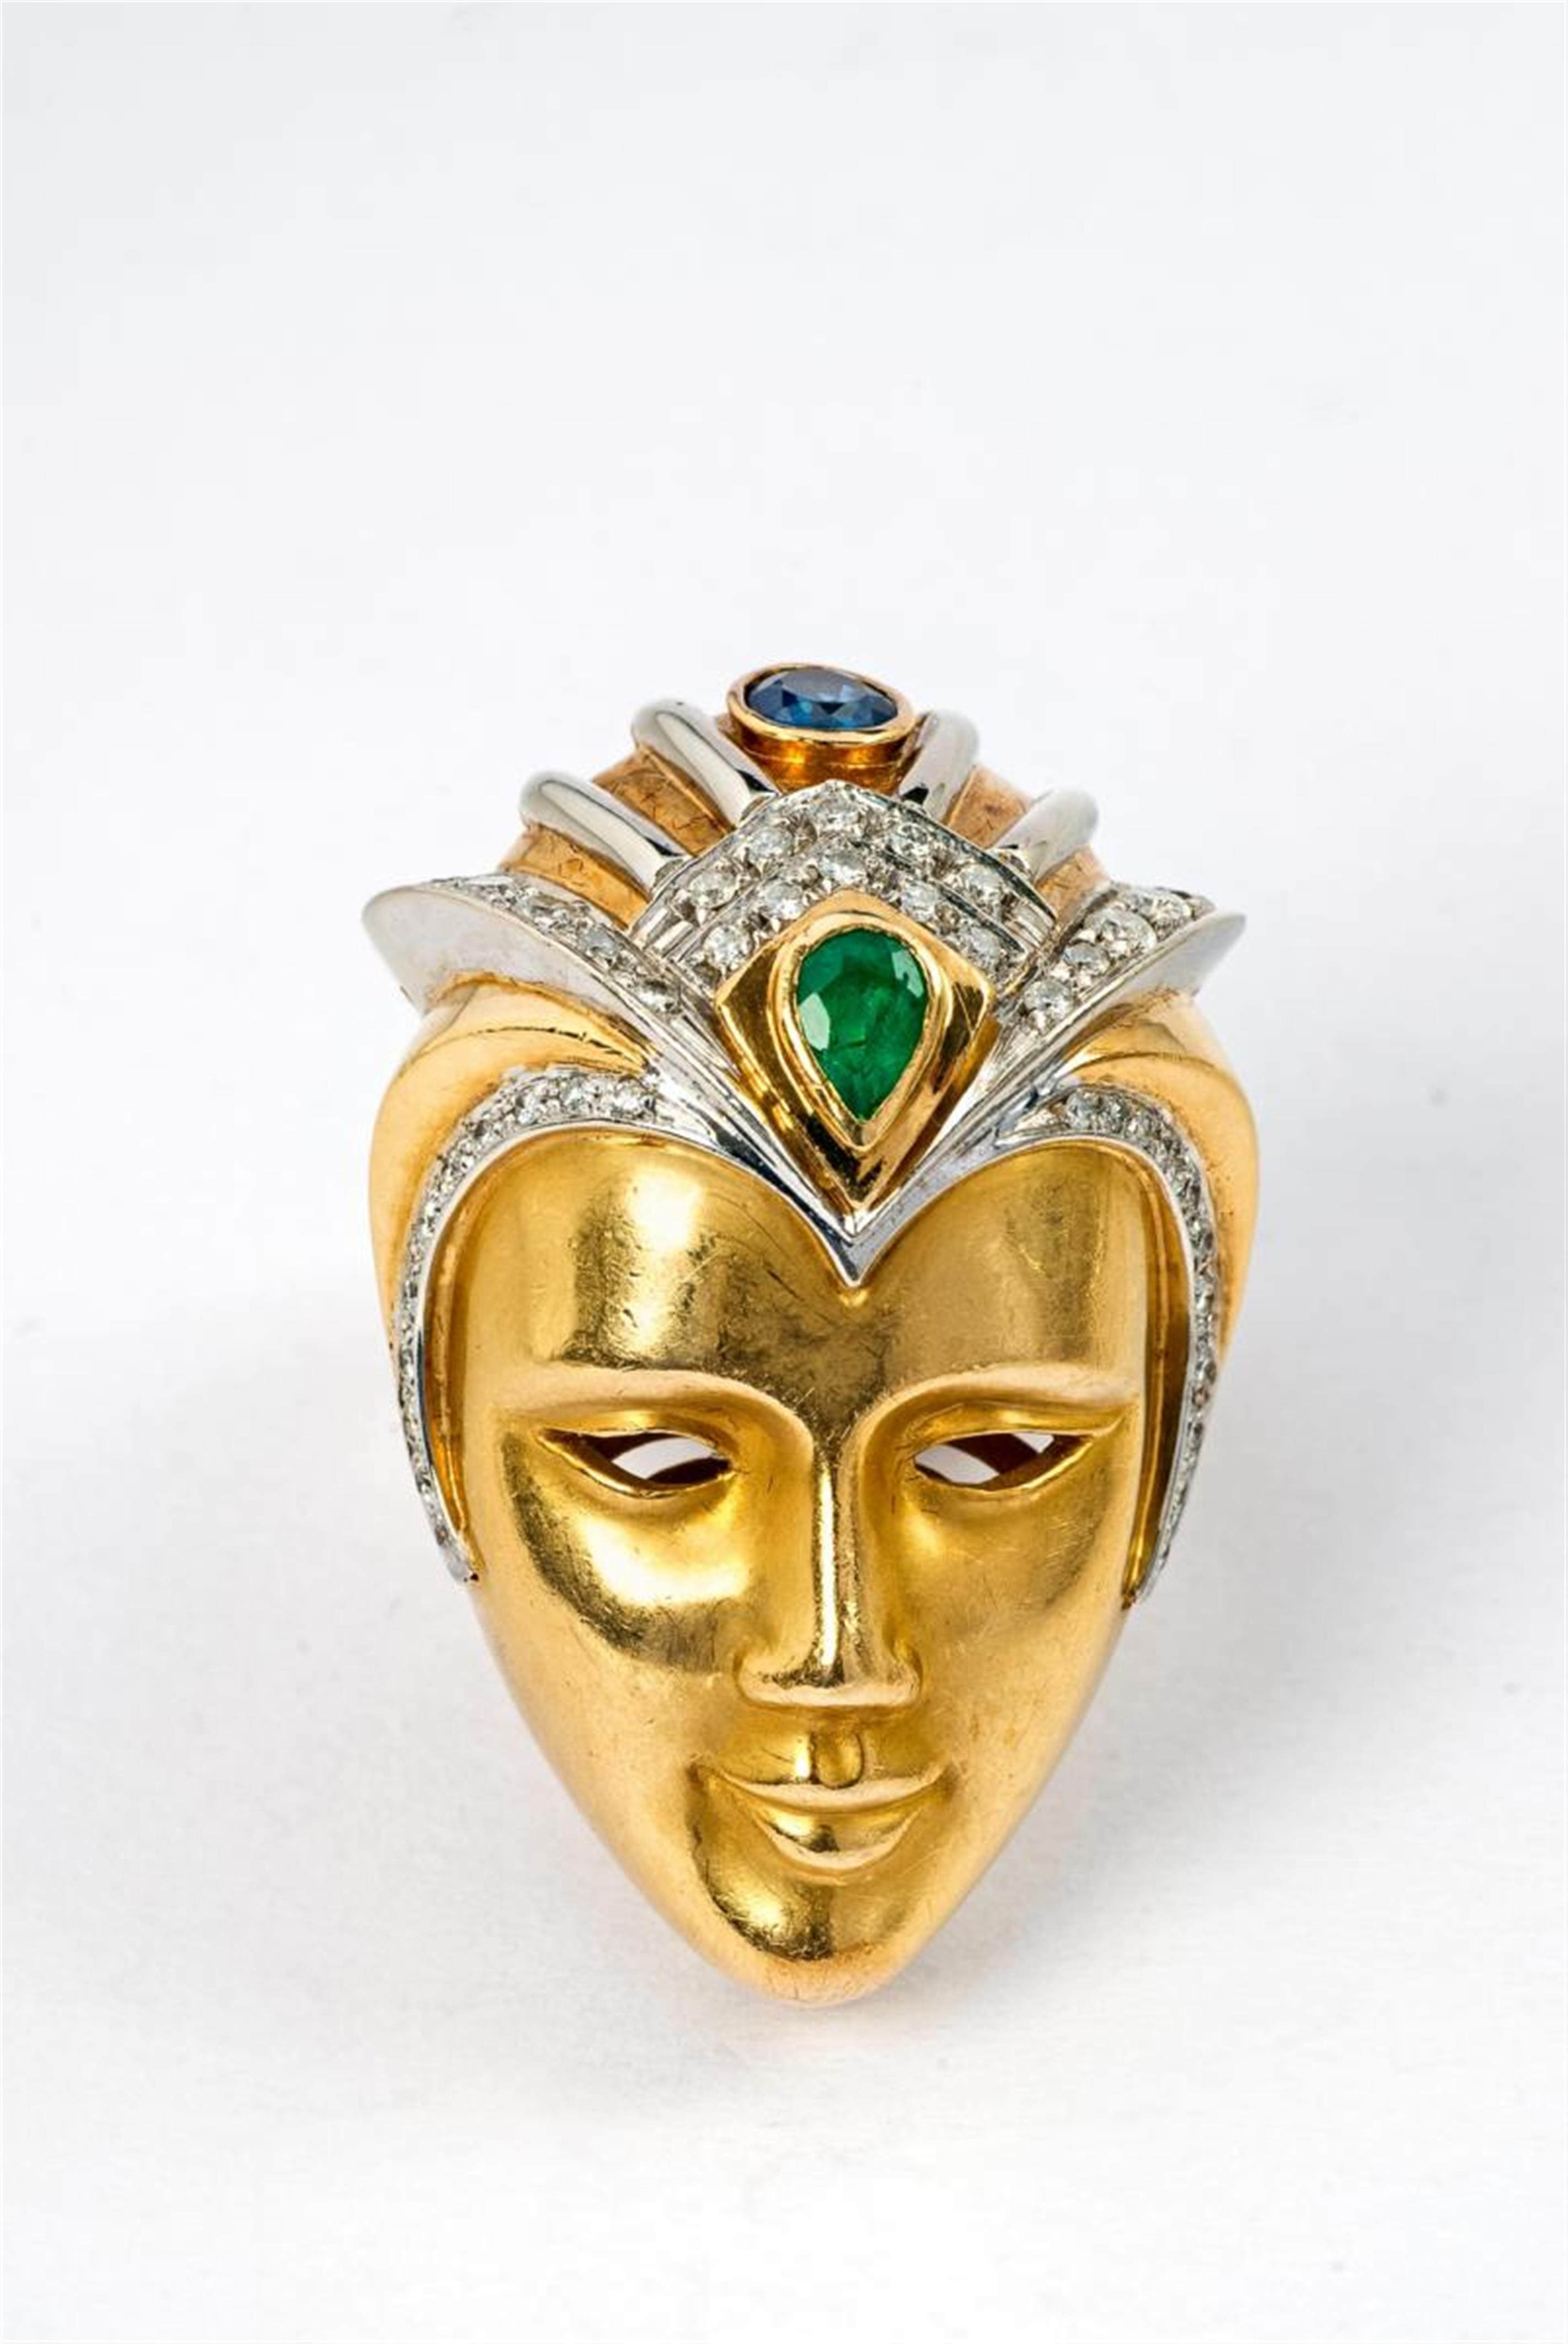 An 18 ct gold, diamond, emerald and sapphire brooch formed as a Venetian mask. - image-1